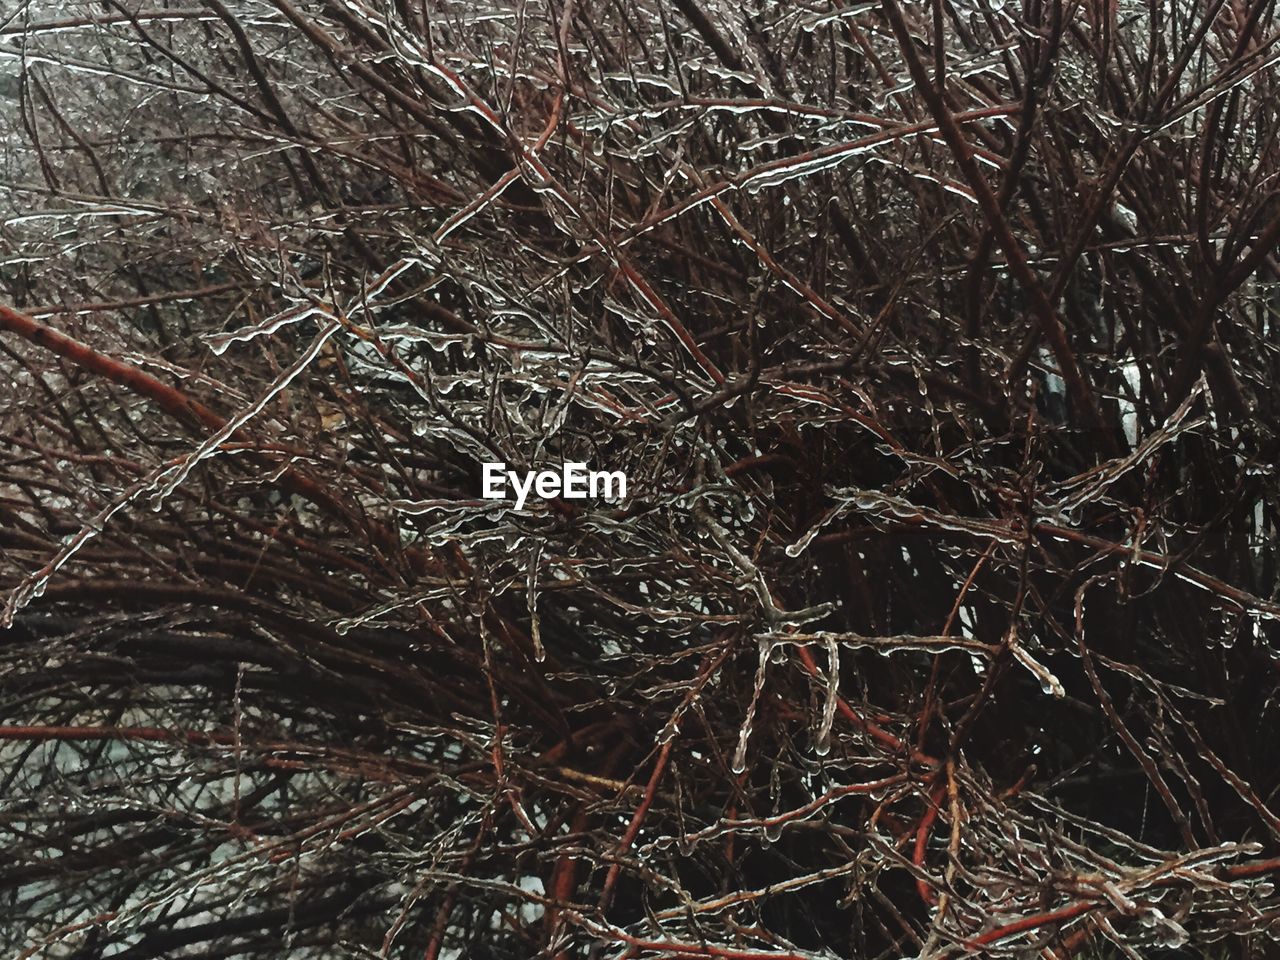 CLOSE-UP OF TREE BRANCHES